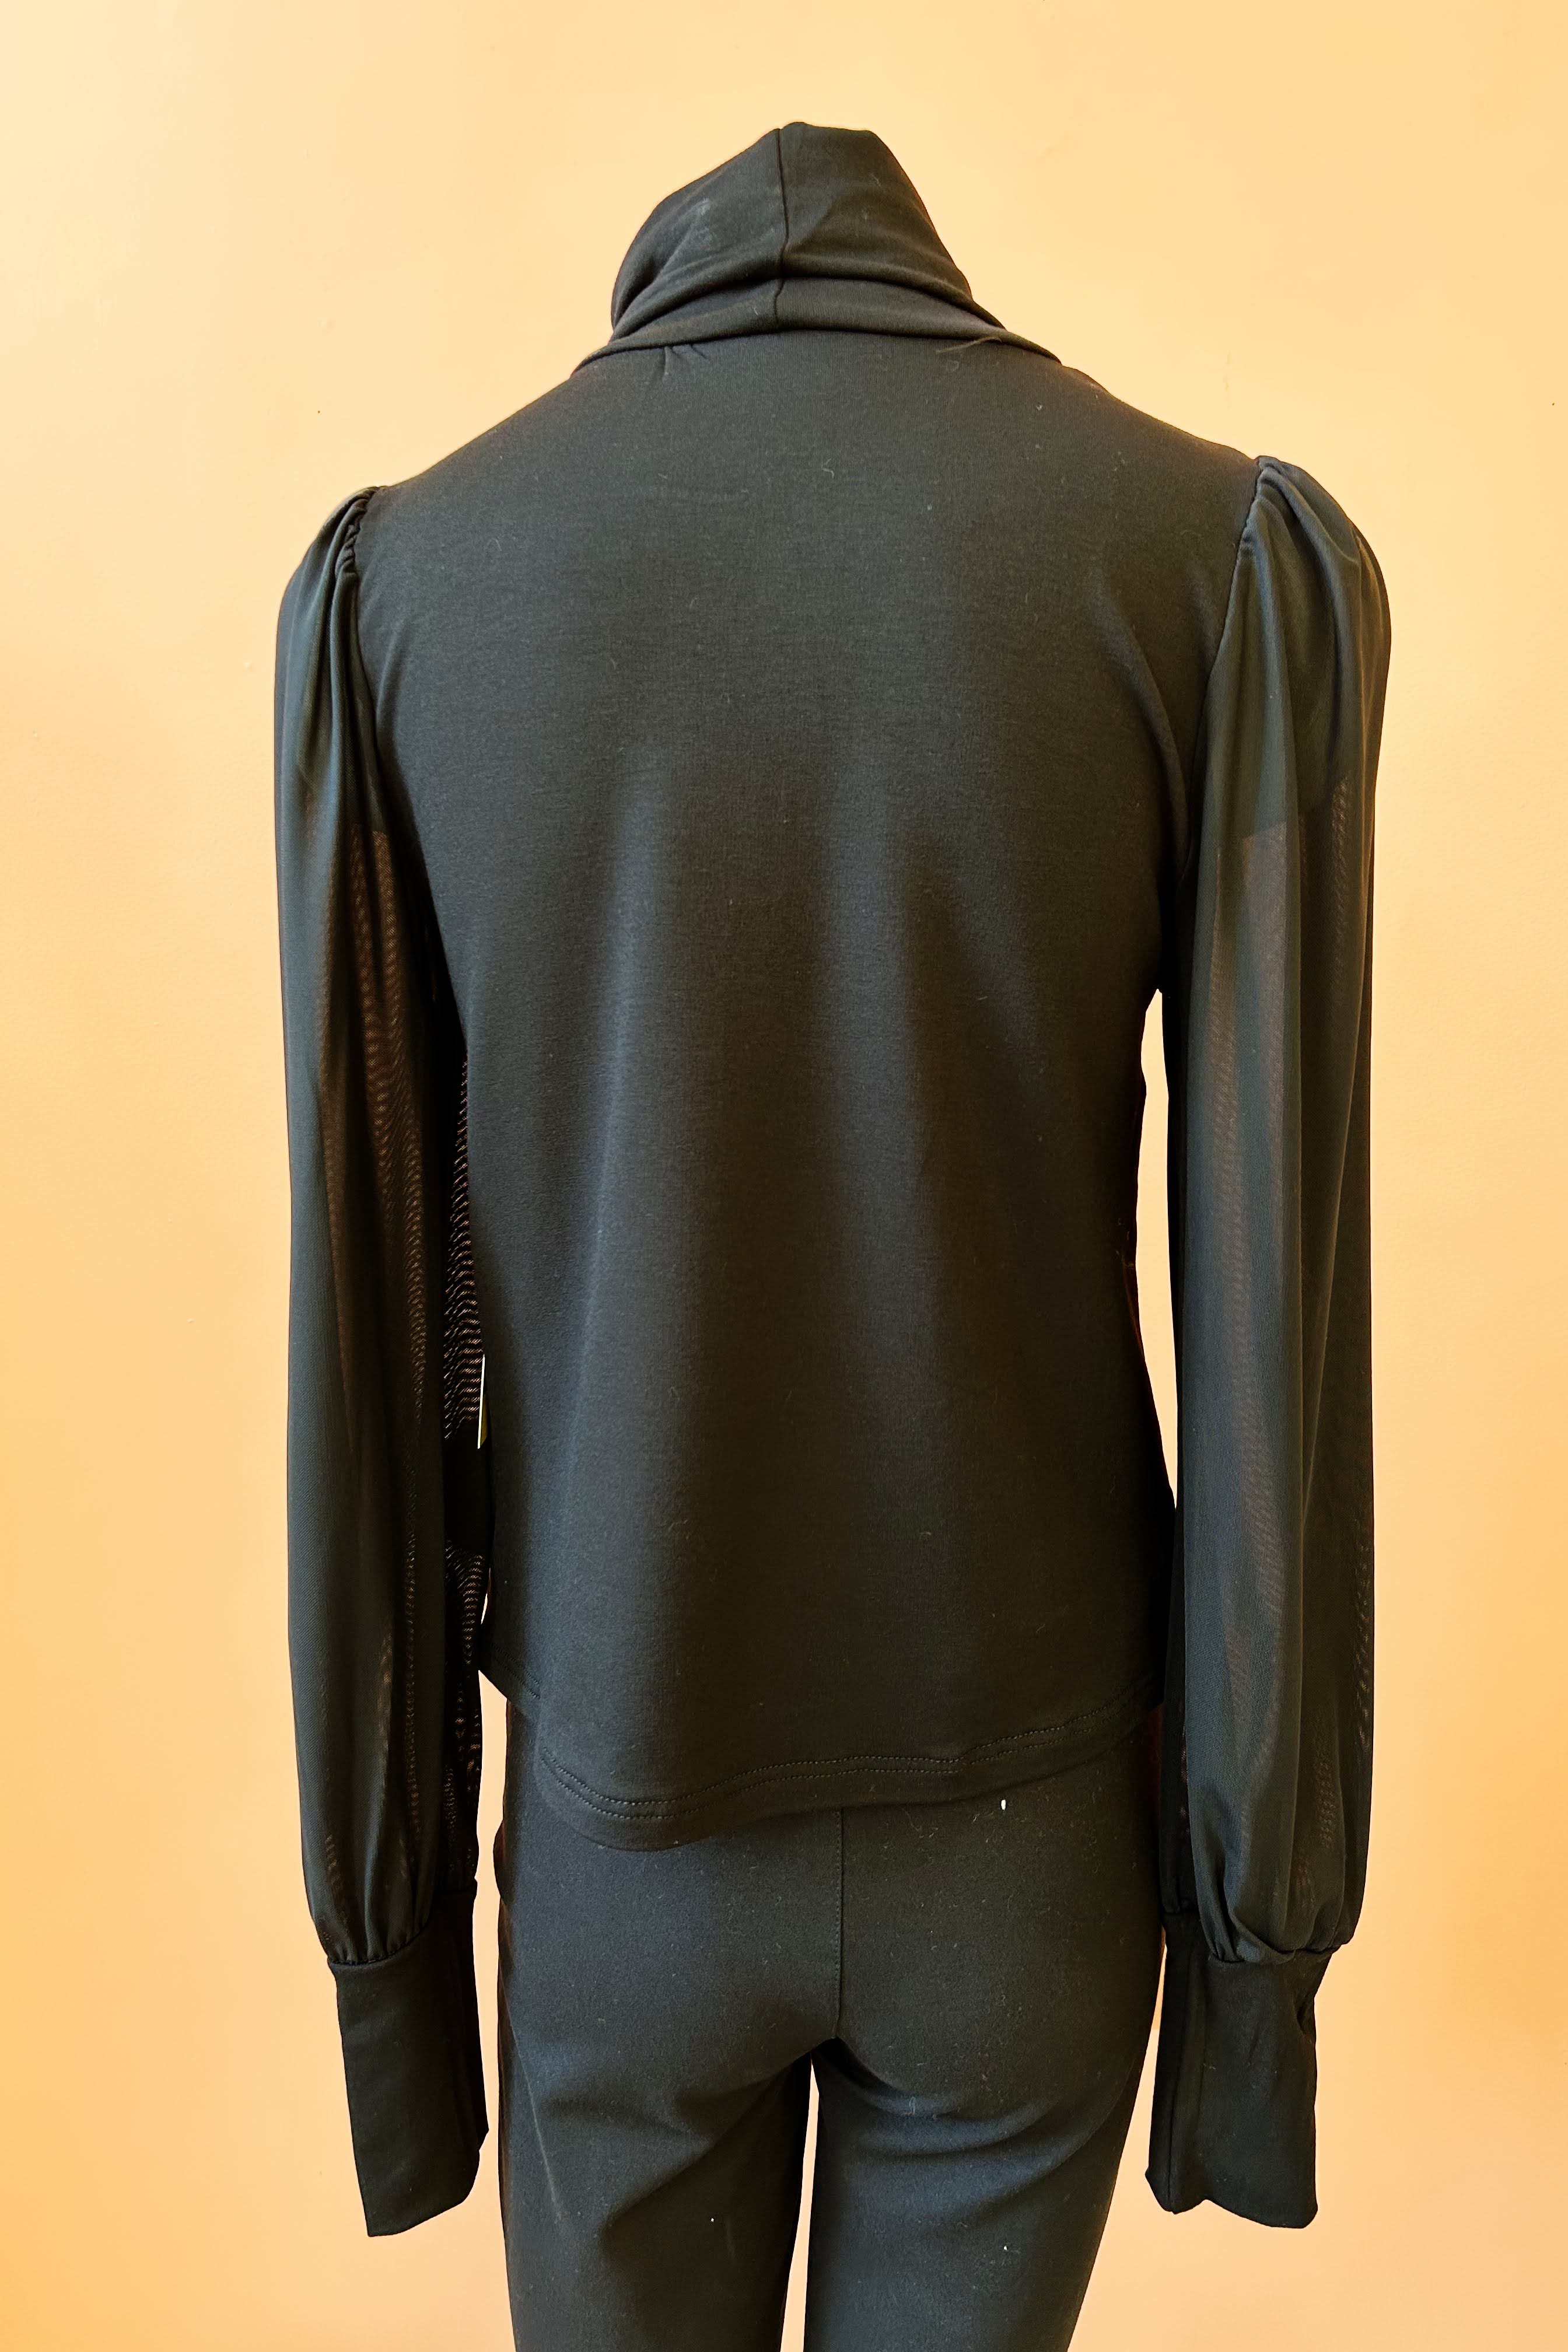 Turtleneck Top by Misstery, Black with Sheer Sleeves, back view, high neck, puffed sleeves with gathered cuffs, sizes S to XL, made in Toronto 